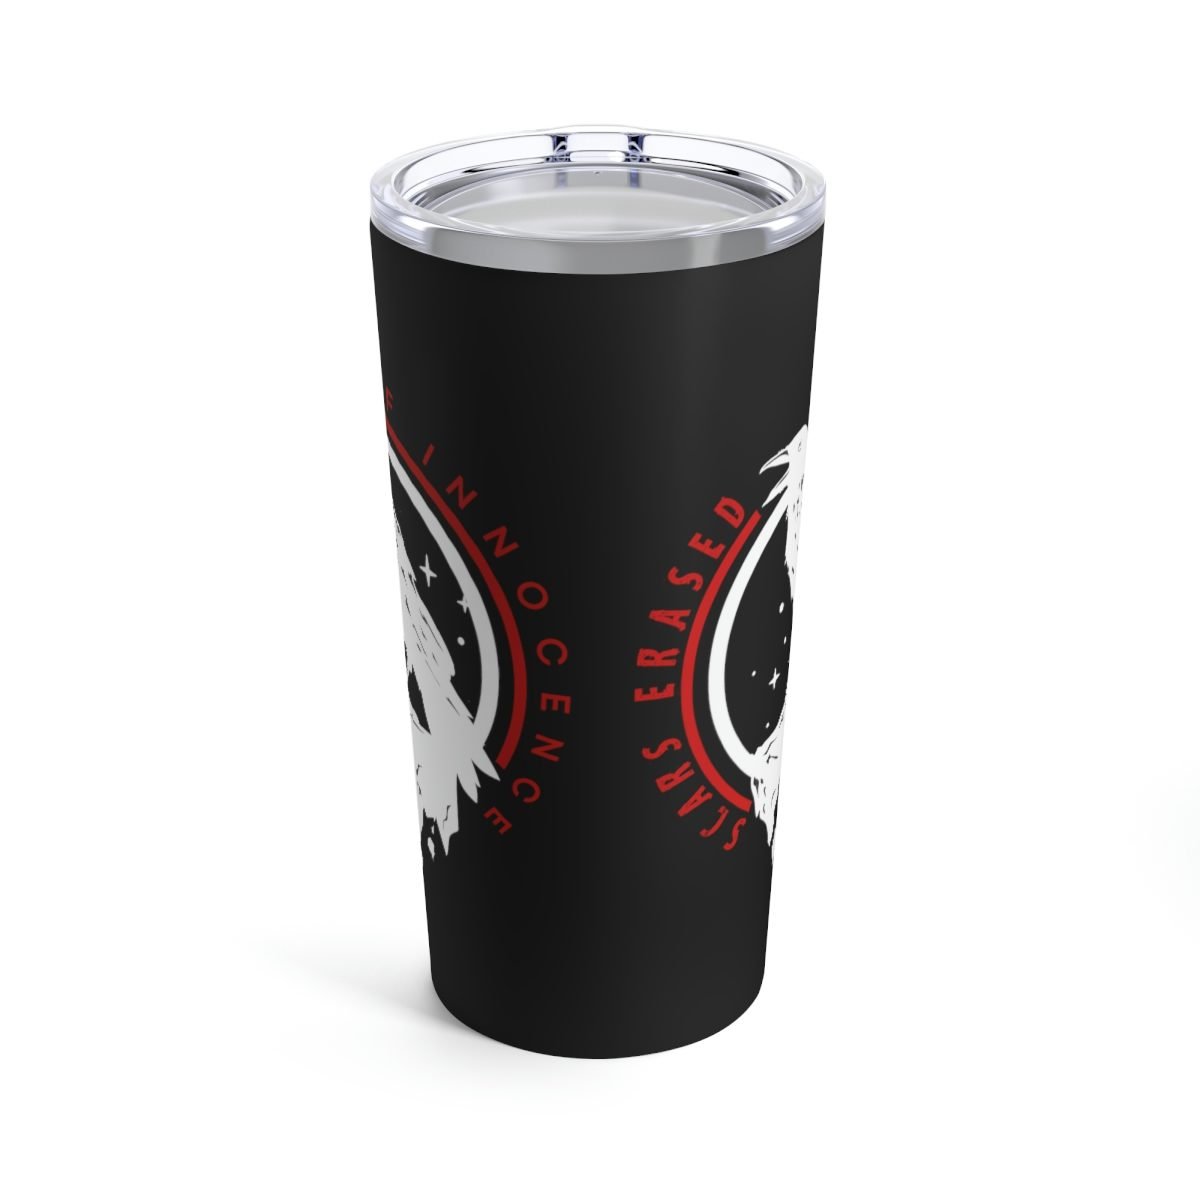 Collision of Innocence – Scars Erased 20 oz Stainless Steel Tumbler